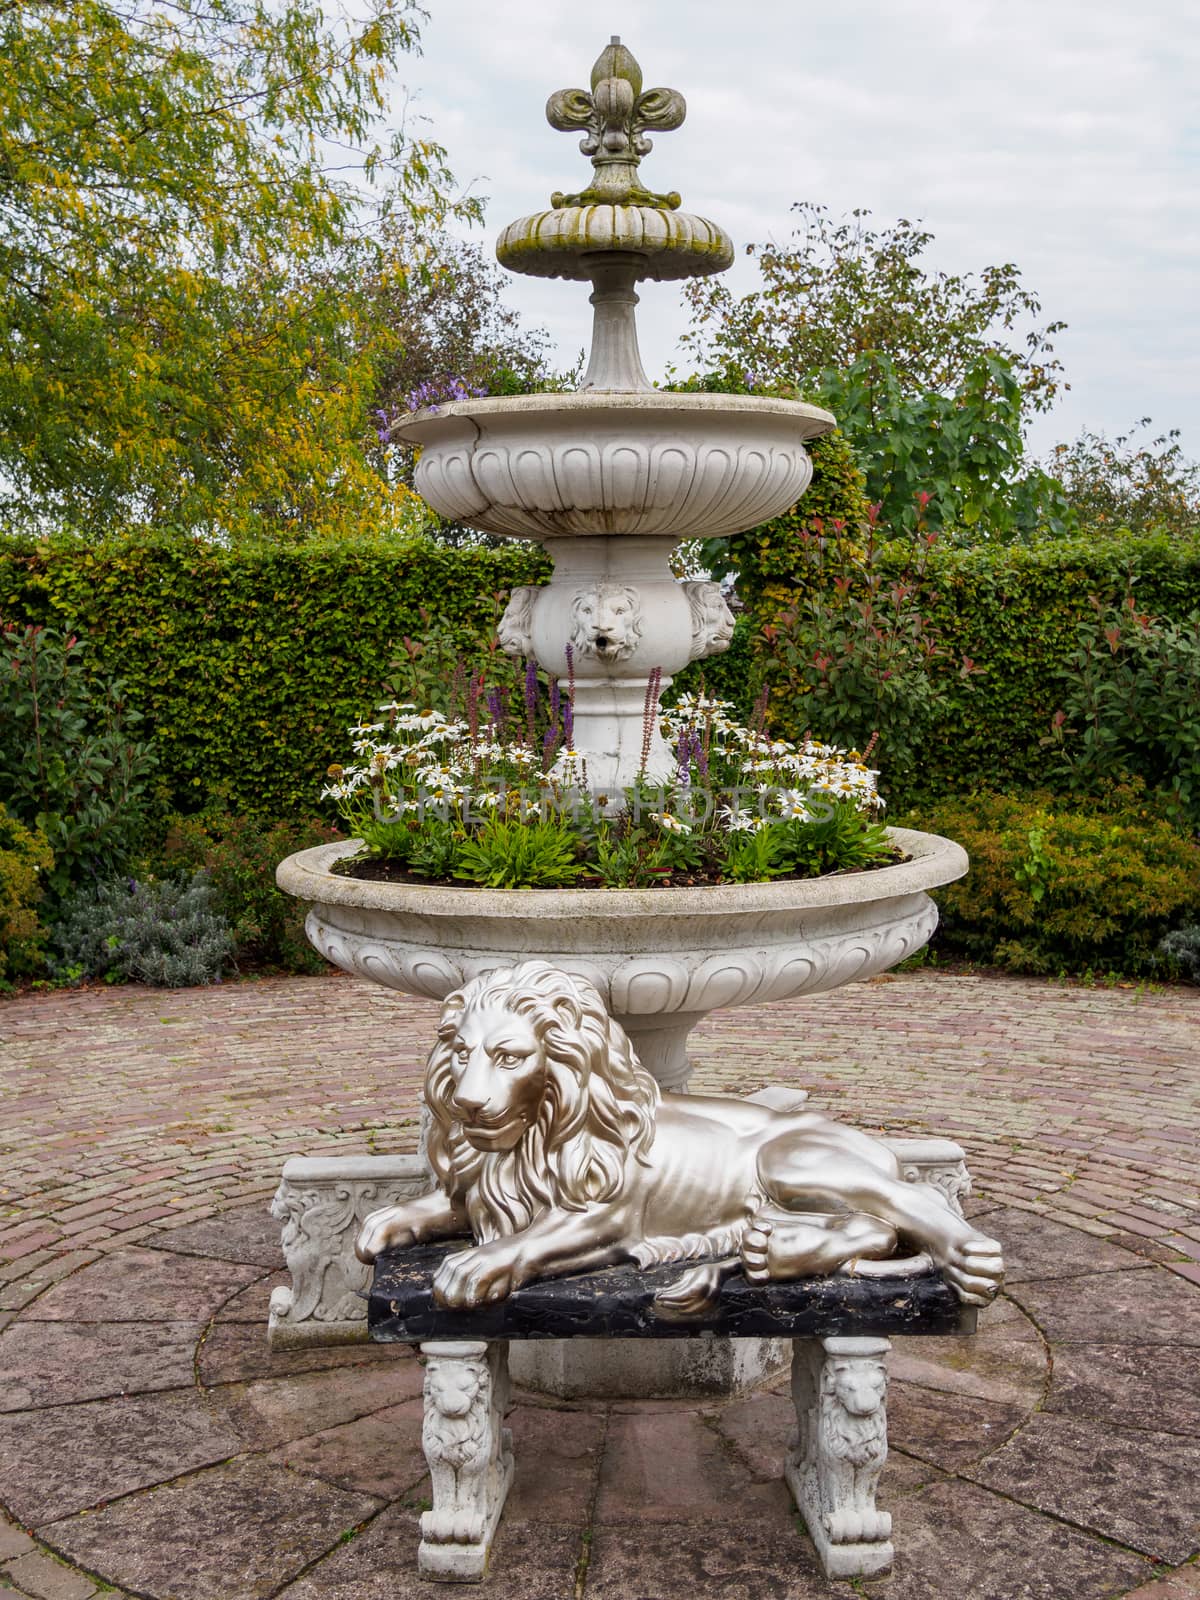 Lion statue in front of fountain  by frankhoekzema